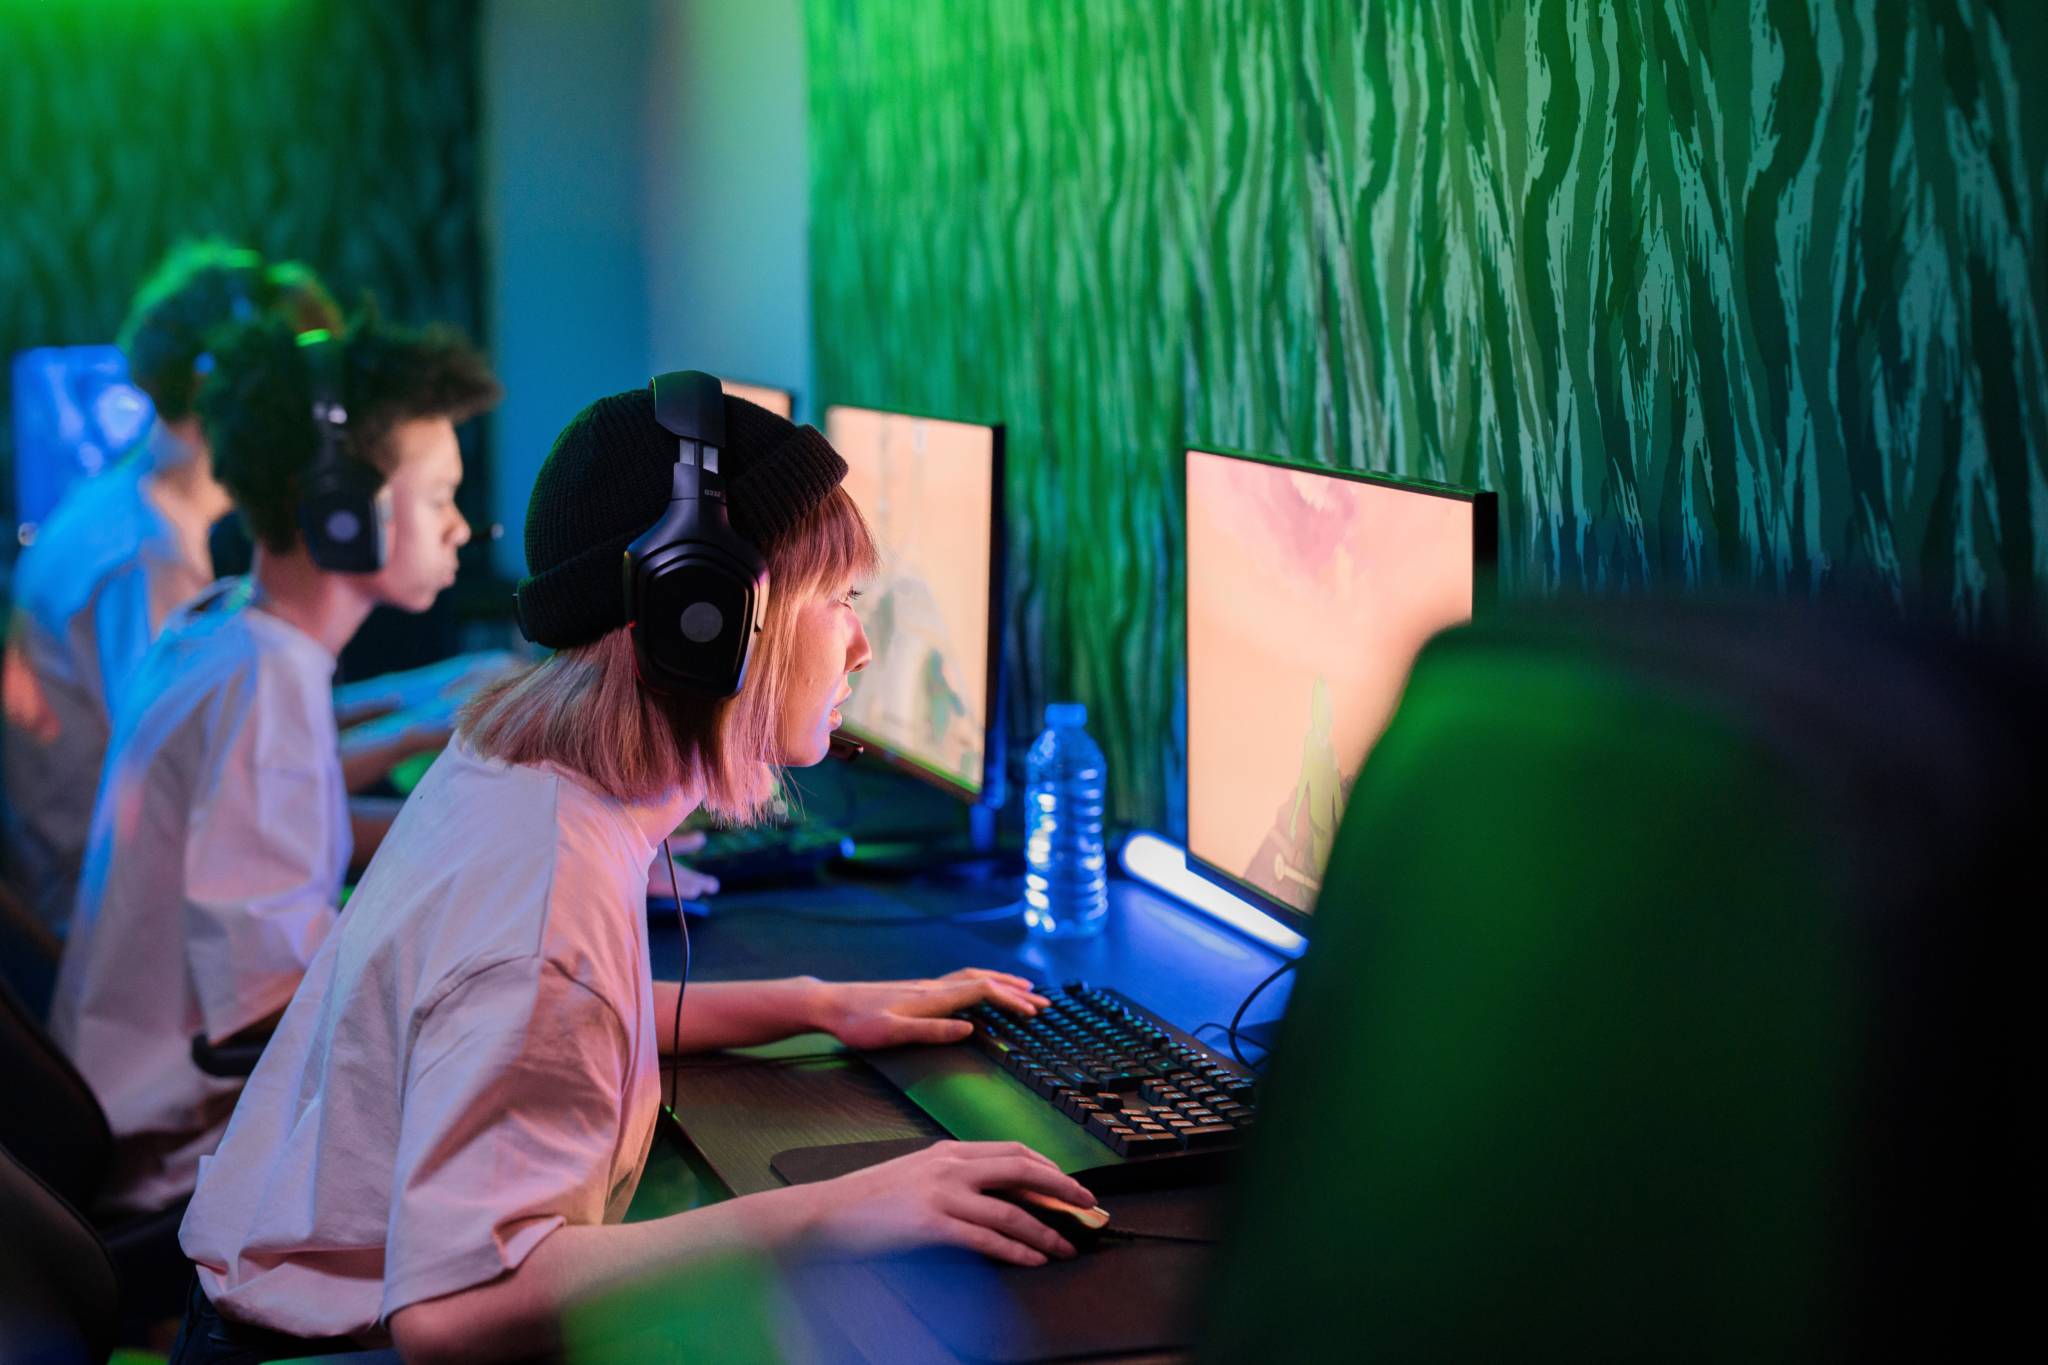 A woman with a headset is leaning towards her PC which shows a video game on the screen. She is in a room with two men who are also staring at their screens. The room is dimly lit with floor green lights.